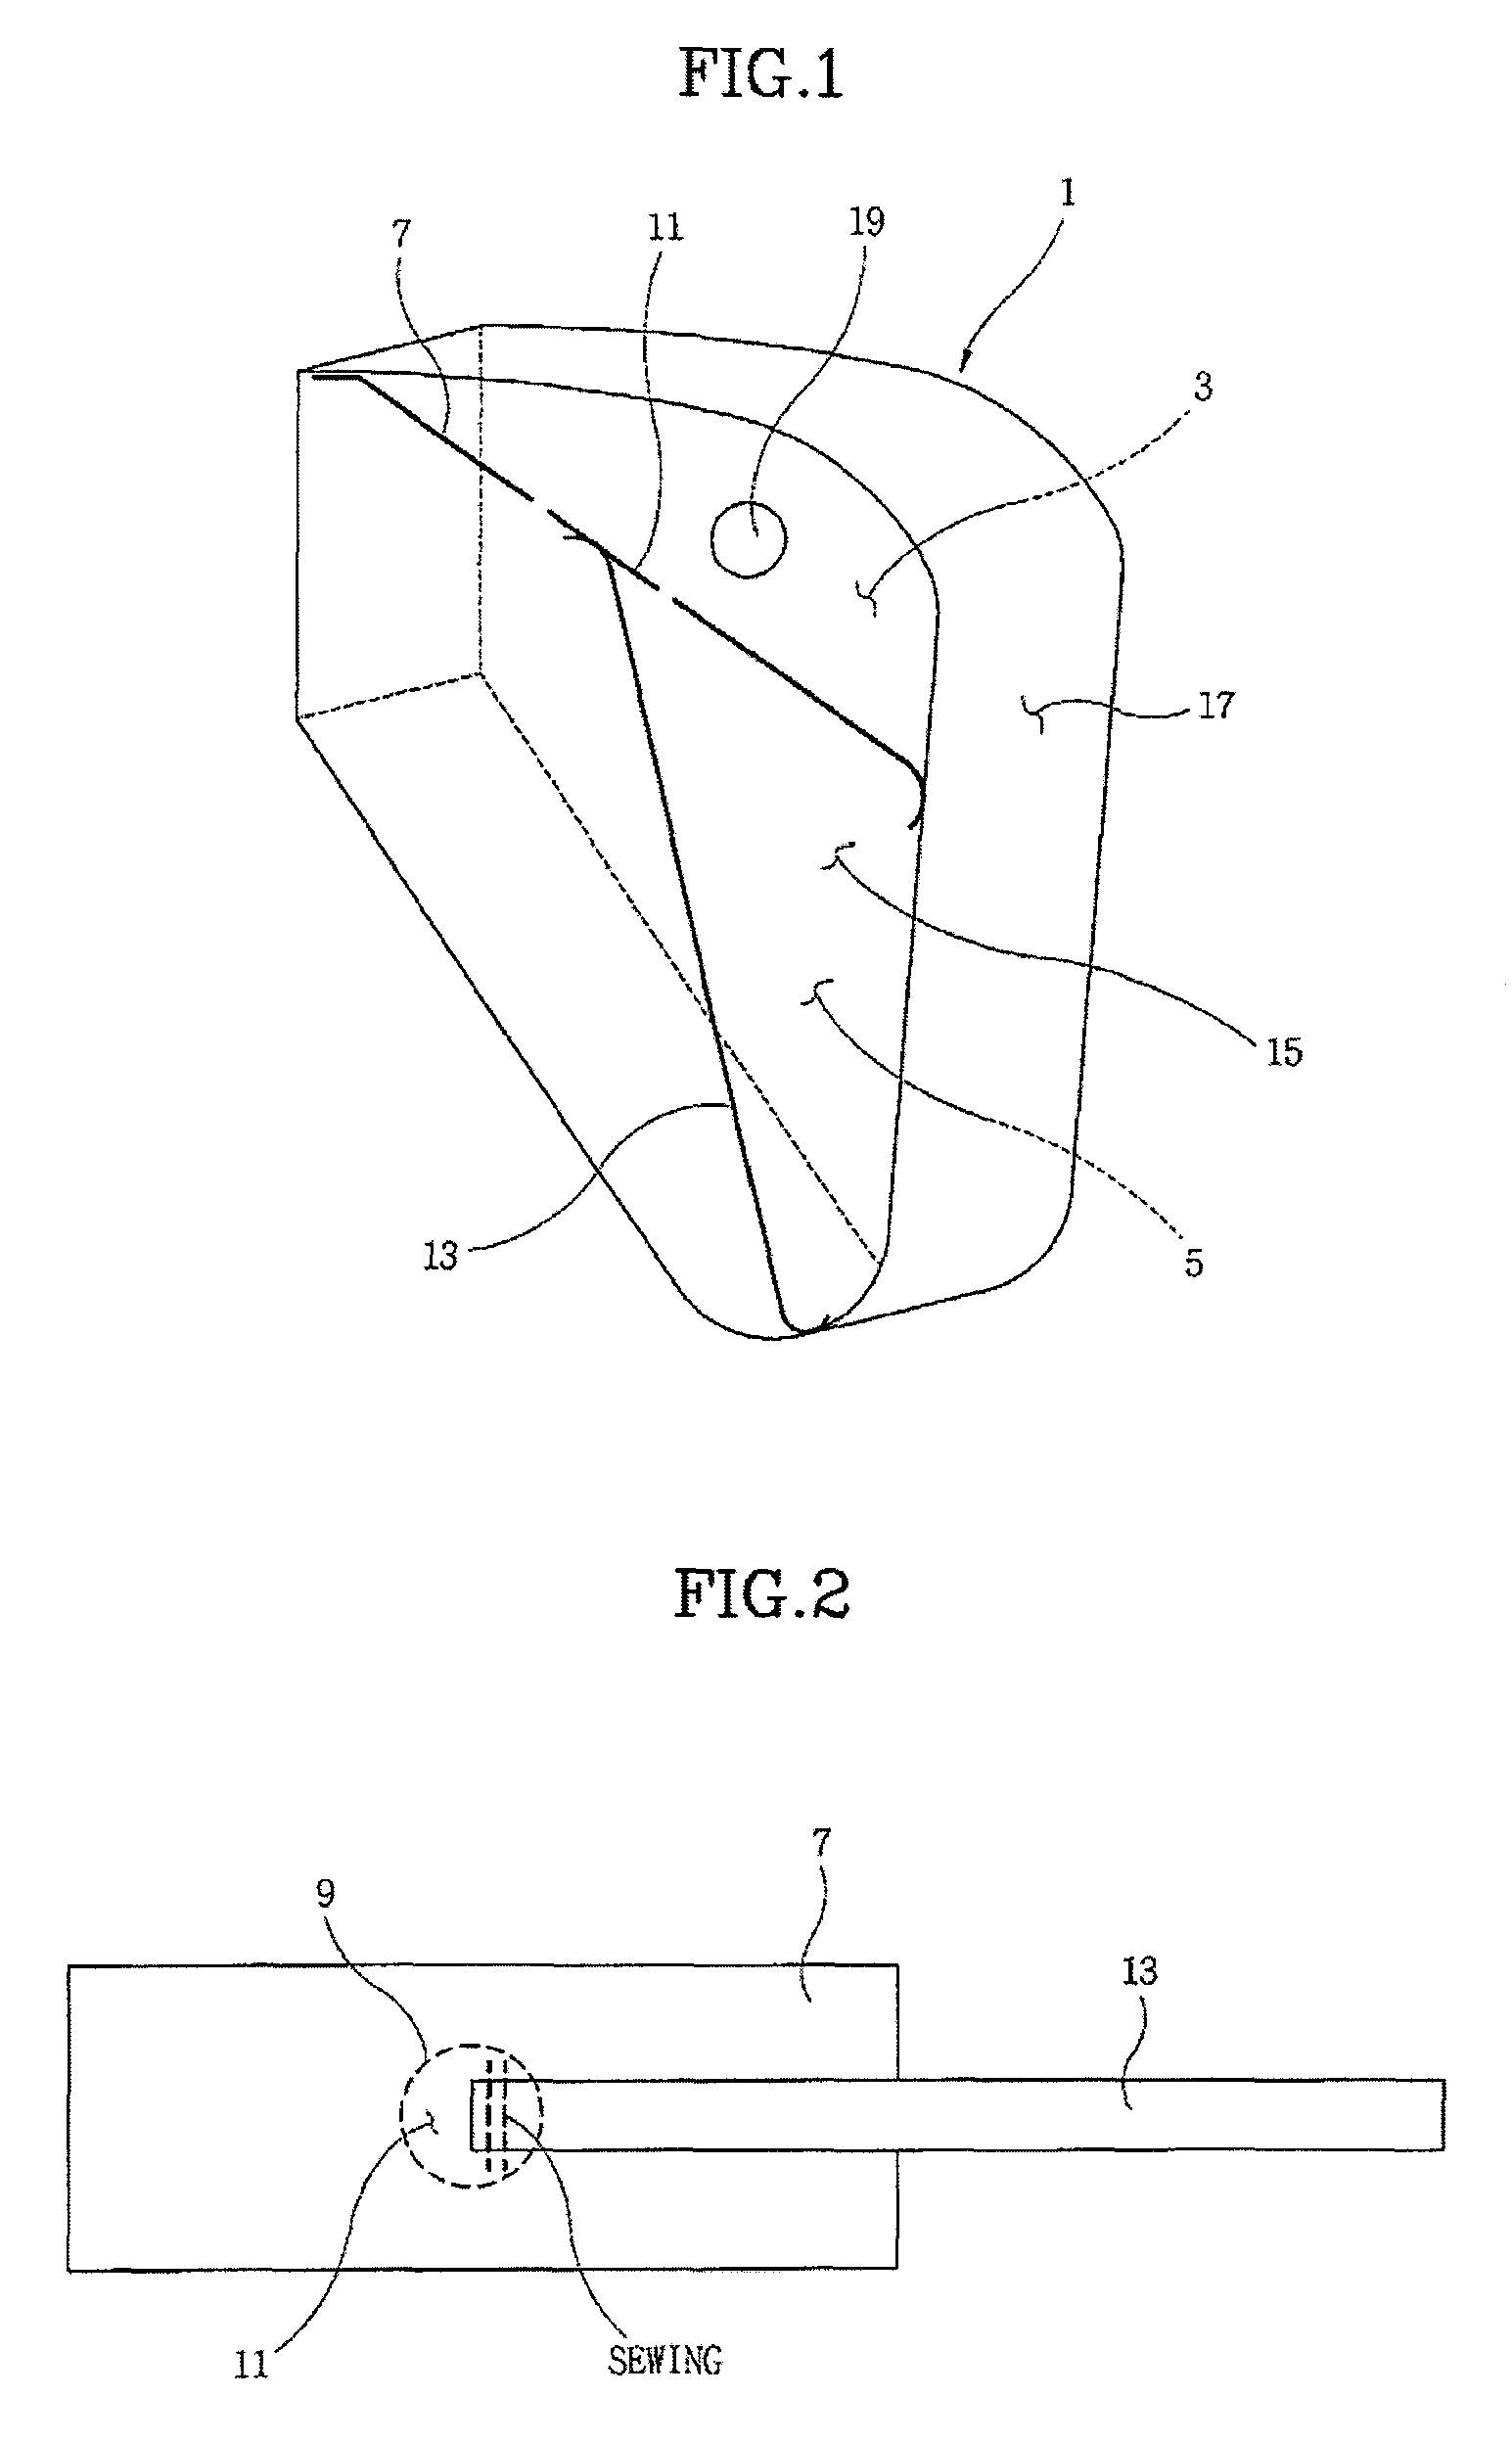 Structure of driver's airbag cushion of vehicle